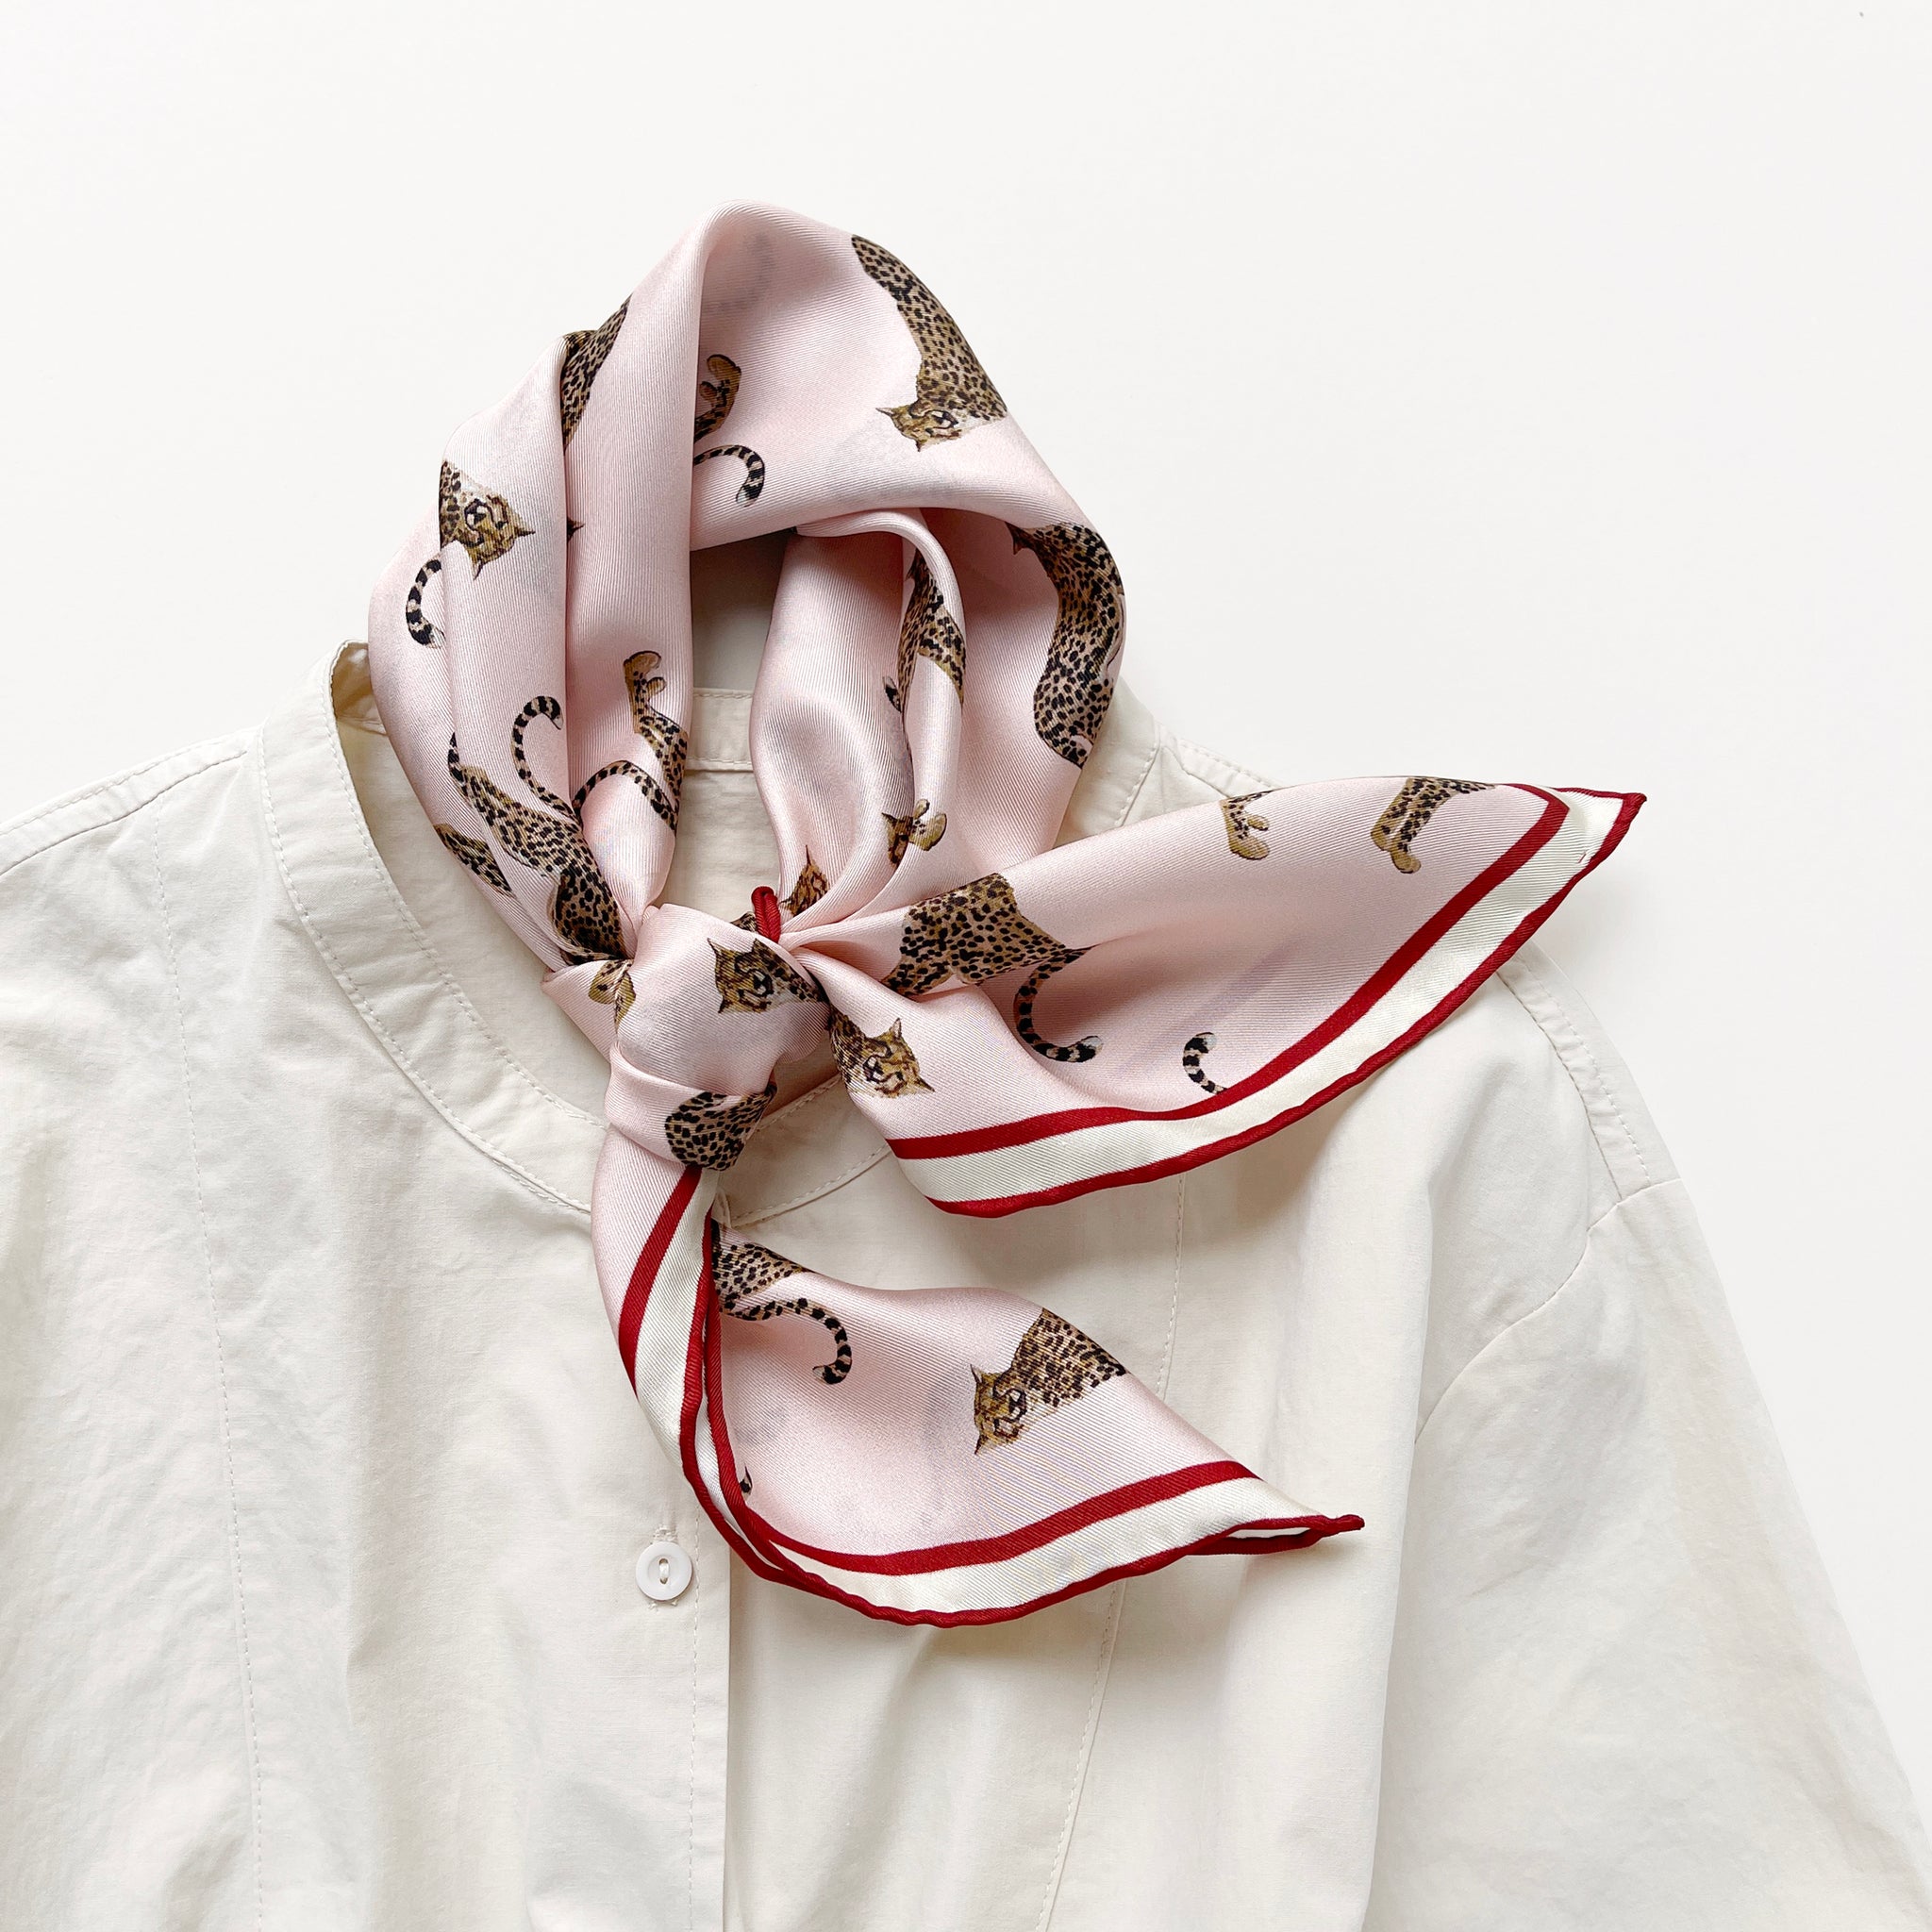 a pink base silk scarf featuring leopard print with red hand-rolled edges, knotted as a neck scarf, paired with a light beige women's shirt